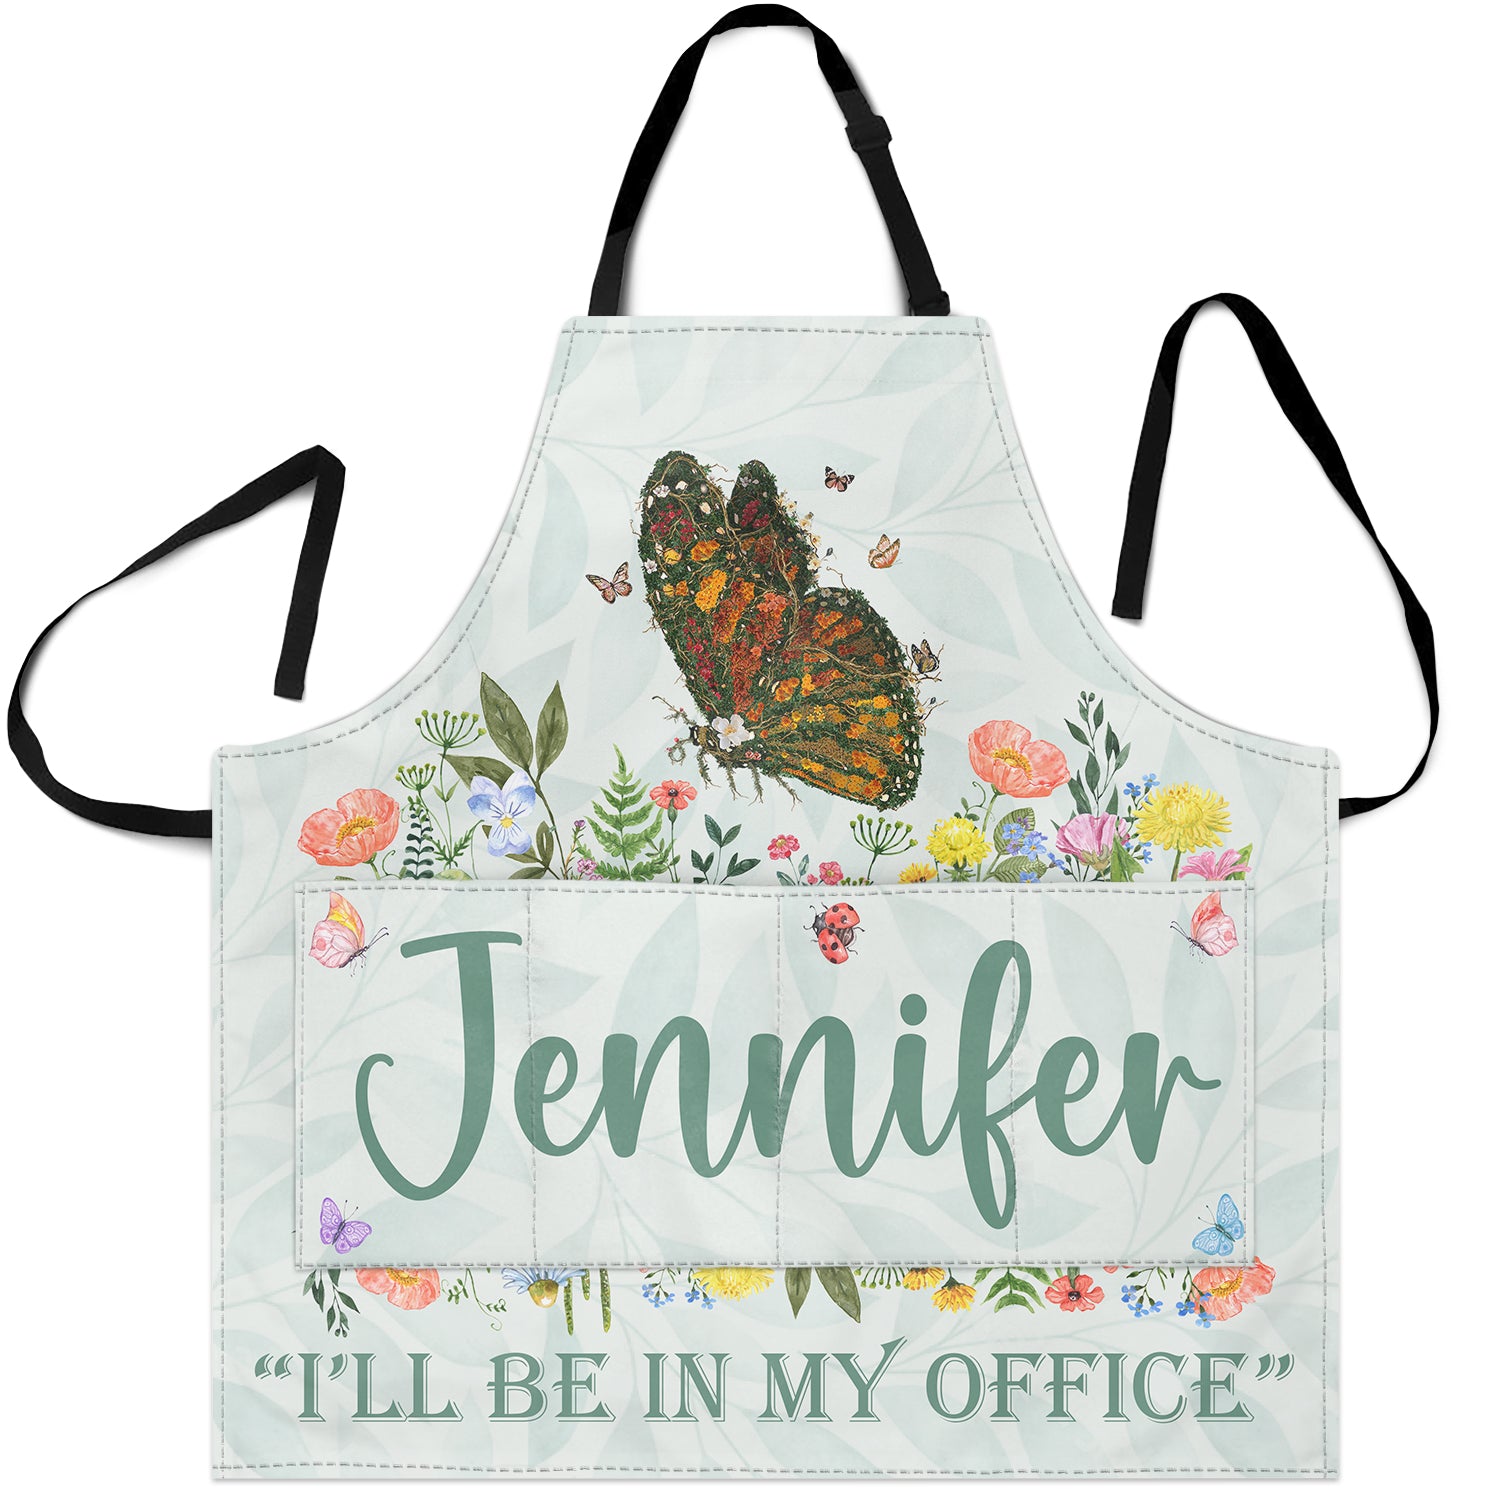 Just A Crazy Plant Mom In Her Office - Birthday, Loving Gift For Mother, Gardening Lover - Personalized Apron